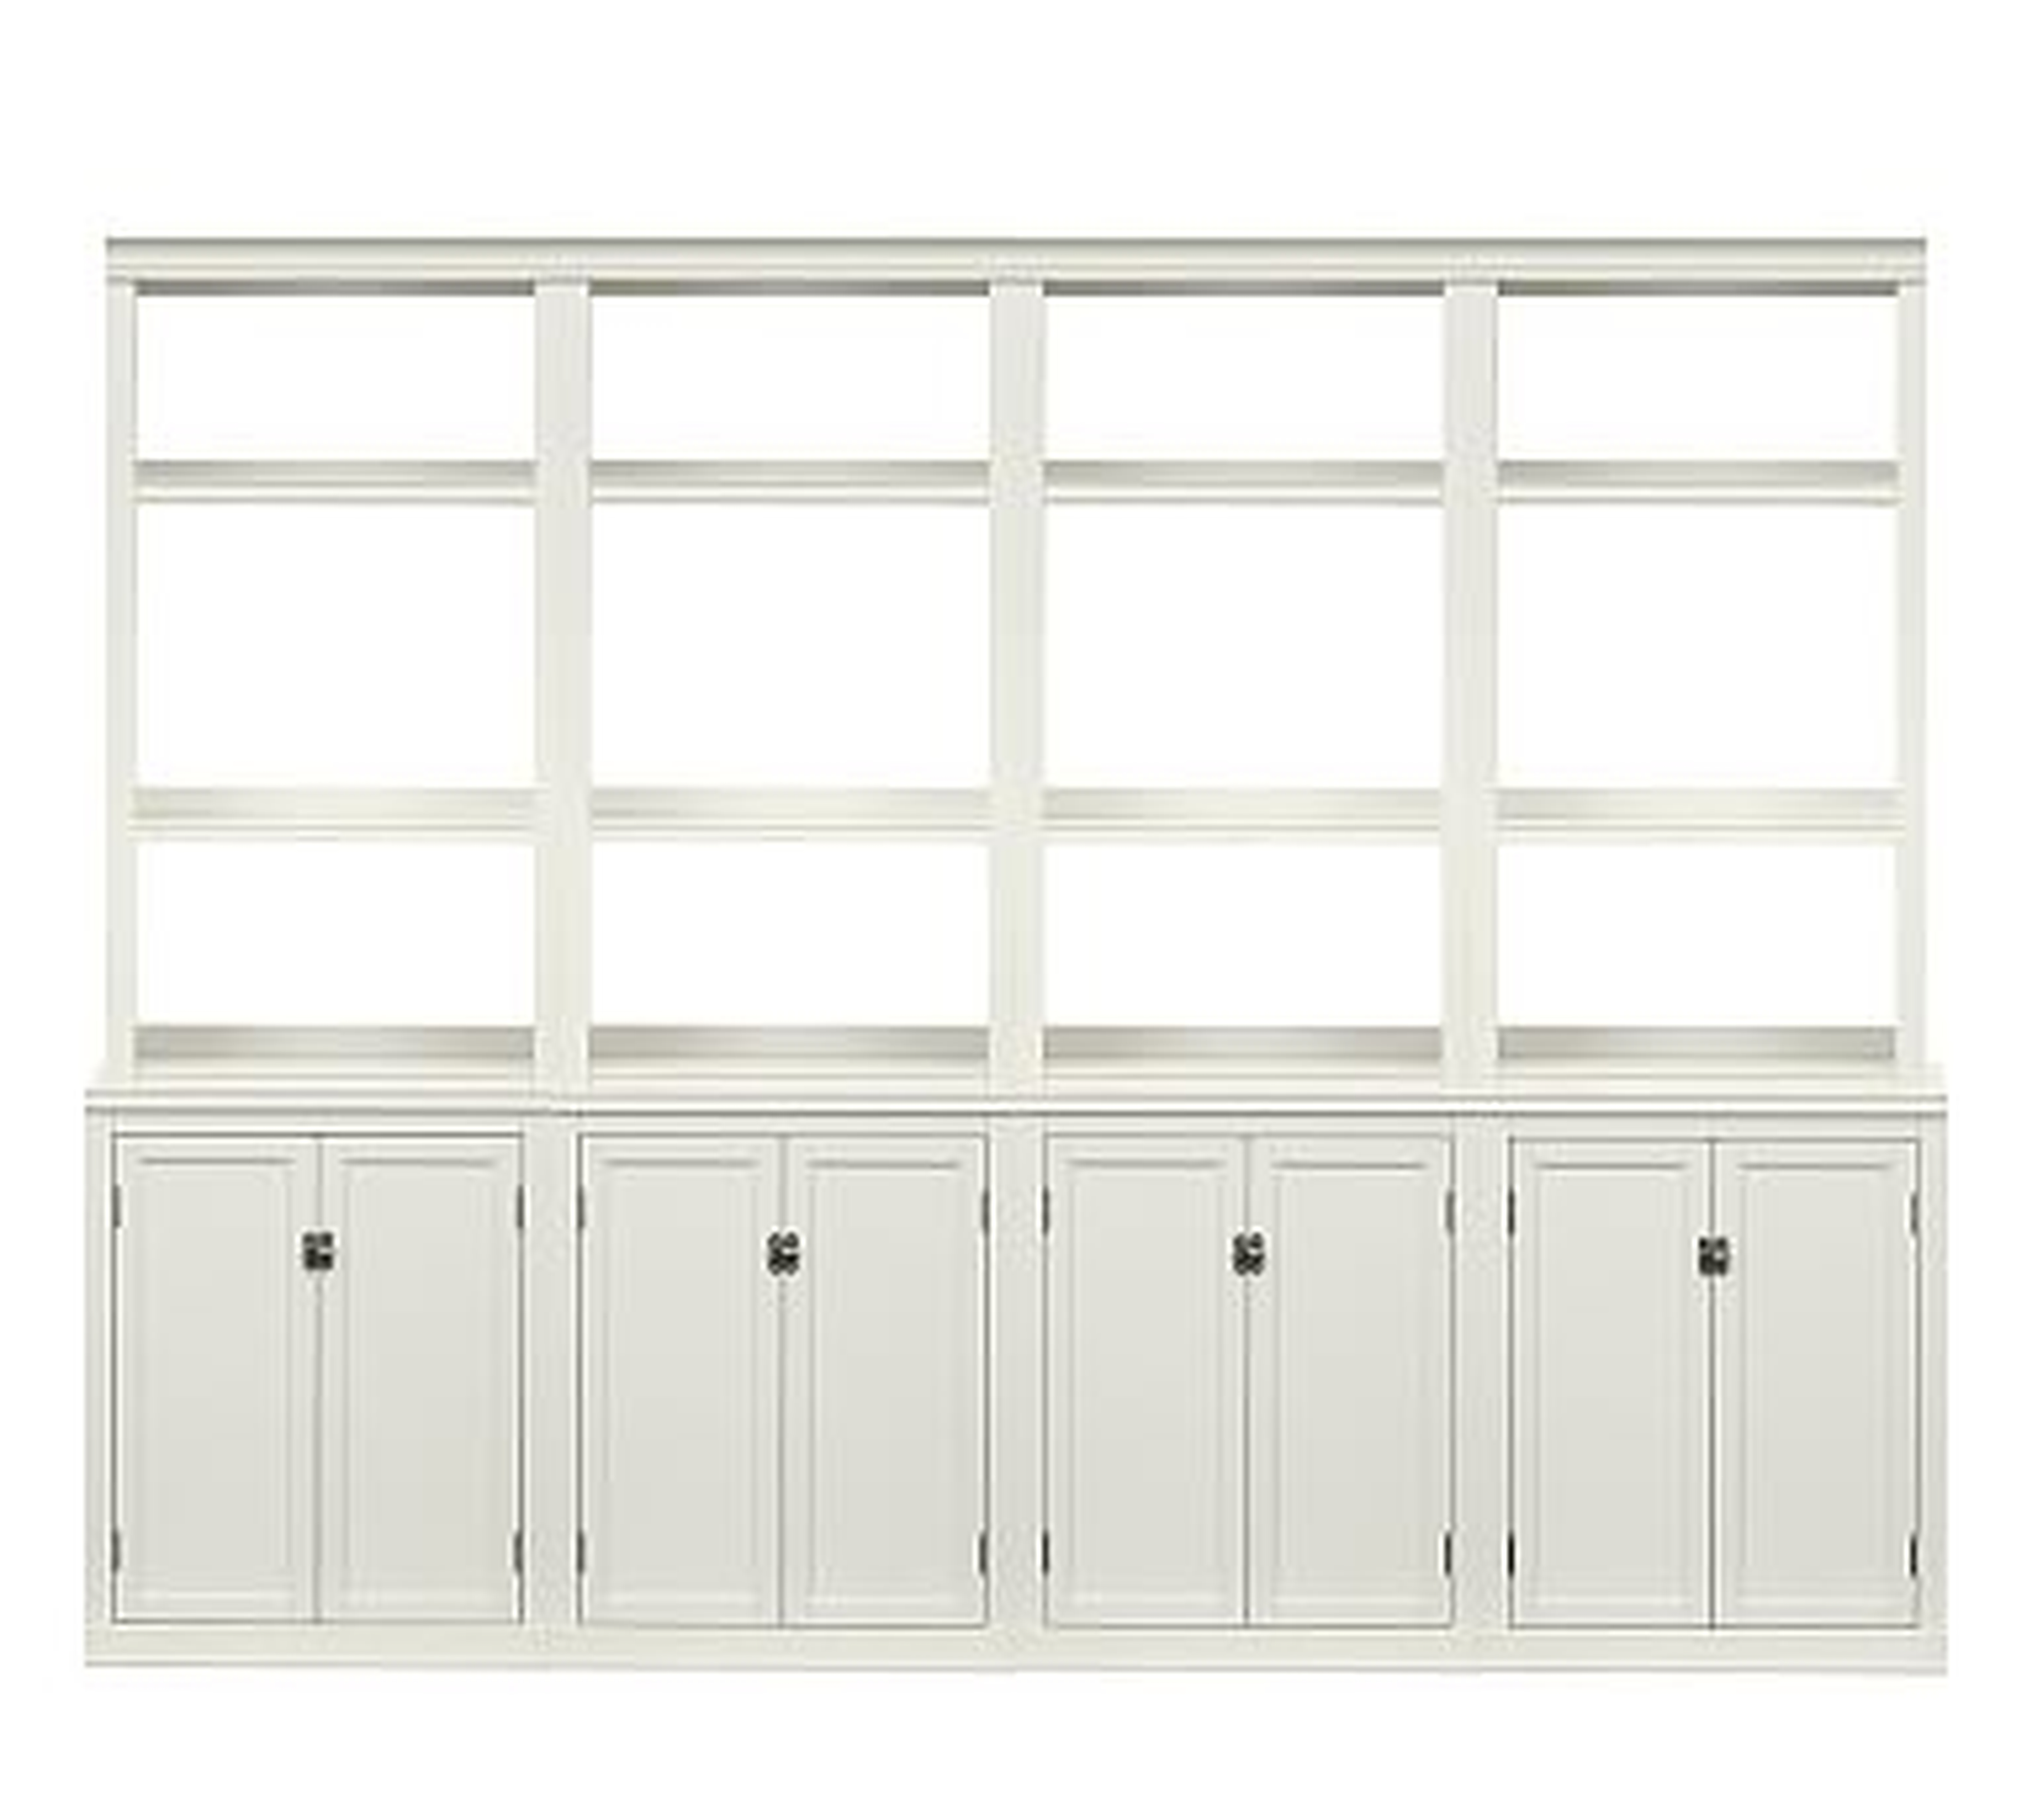 Logan Small Wall Suite with Open Shelving, Antique White - Pottery Barn